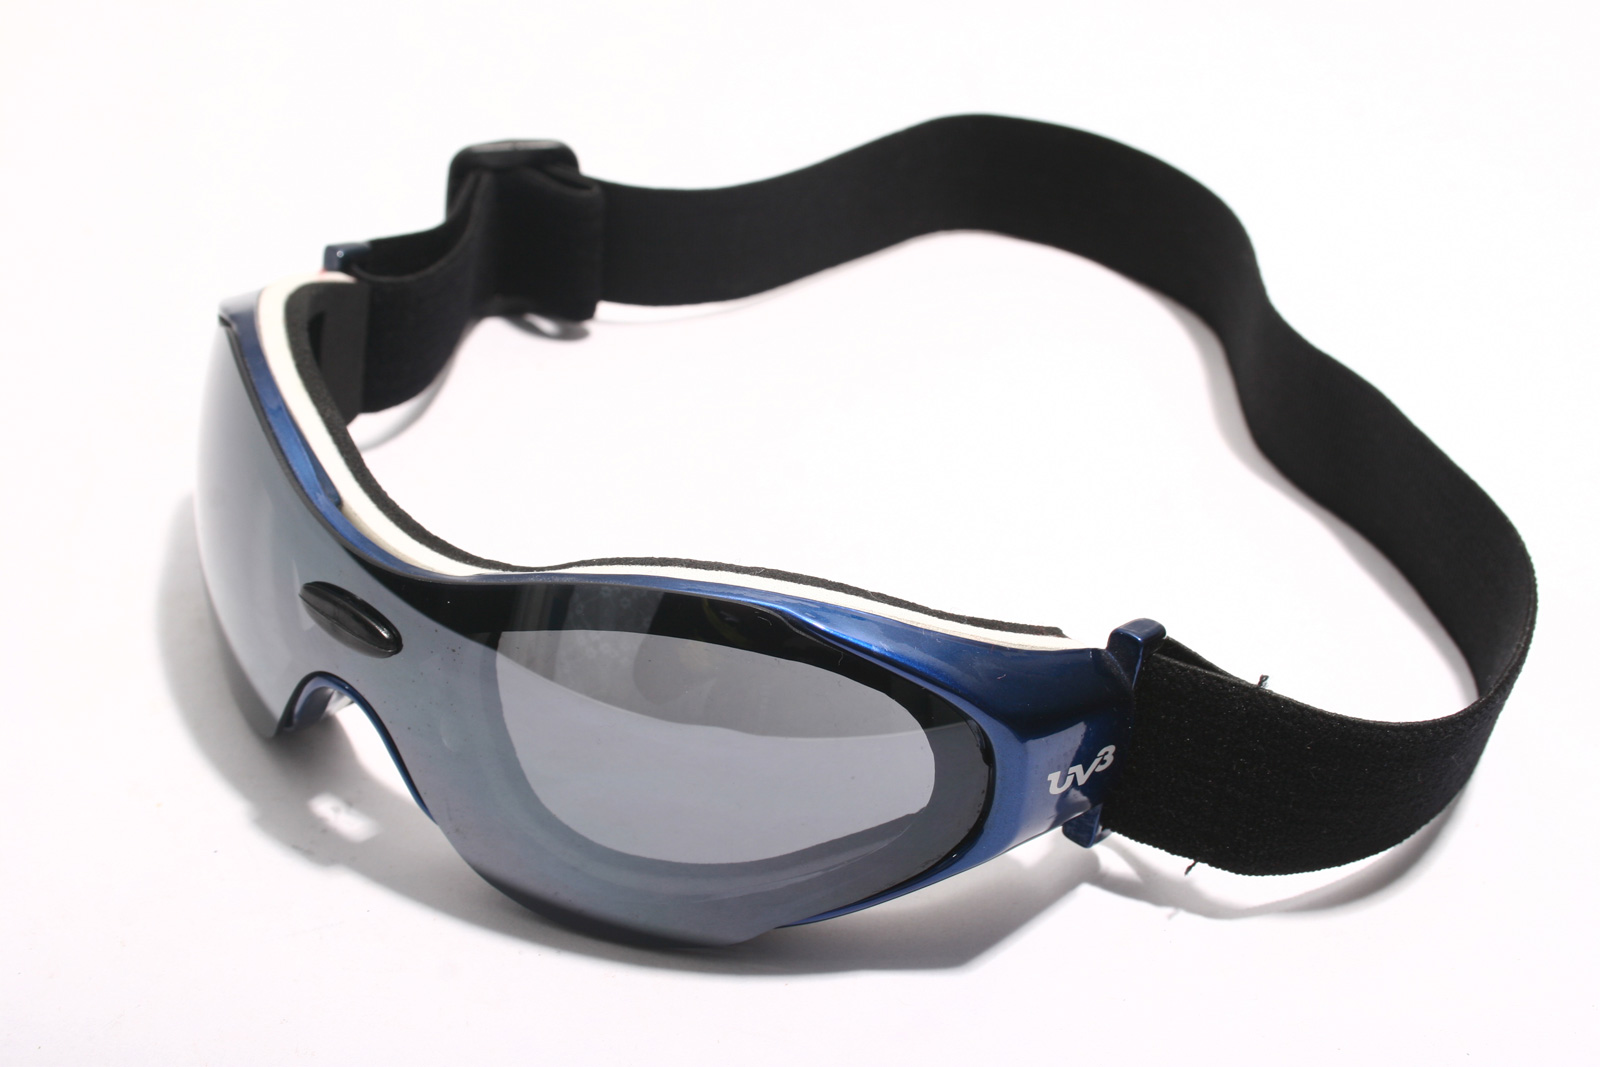 Glasses with UV protection